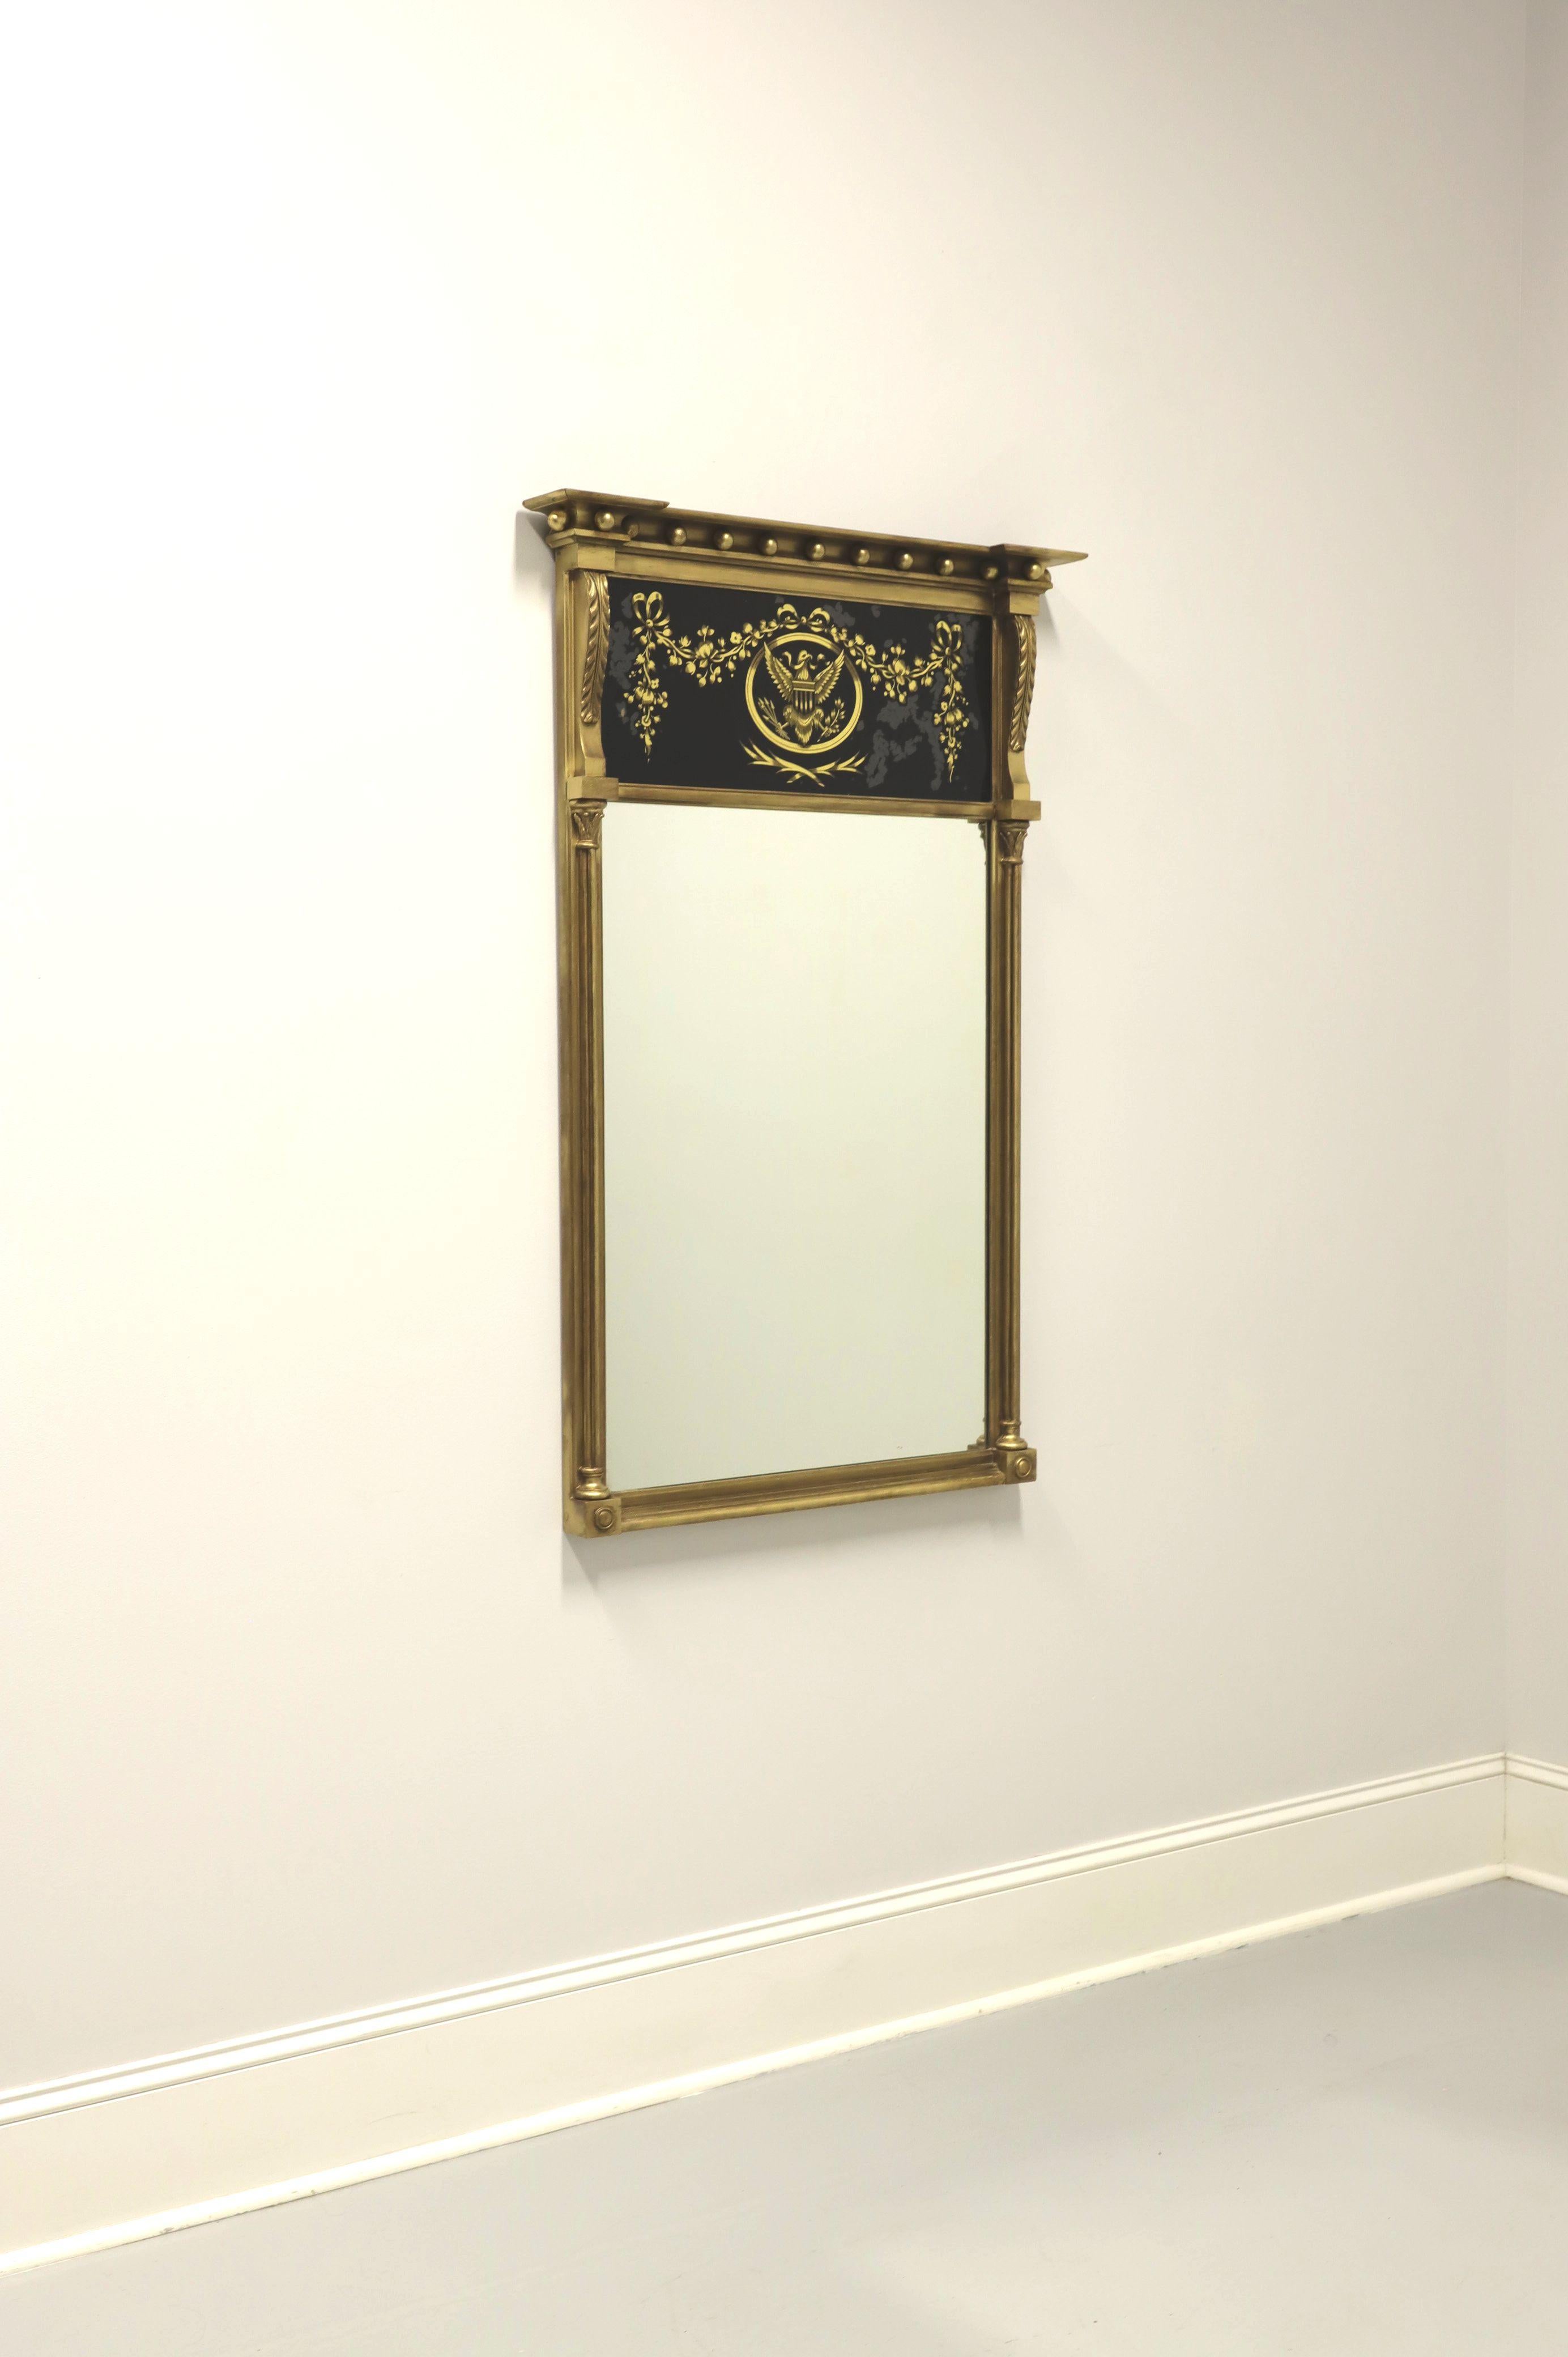 A vintage Federal style Trumeau wall mirror by Friedman Brothers. Mirror glass in a tall giltwood frame with an eglomise top panel, a reverse painted black & gold eagle seal with garland. Made in the USA, in the mid 20th century.

Measures: 31 W 4